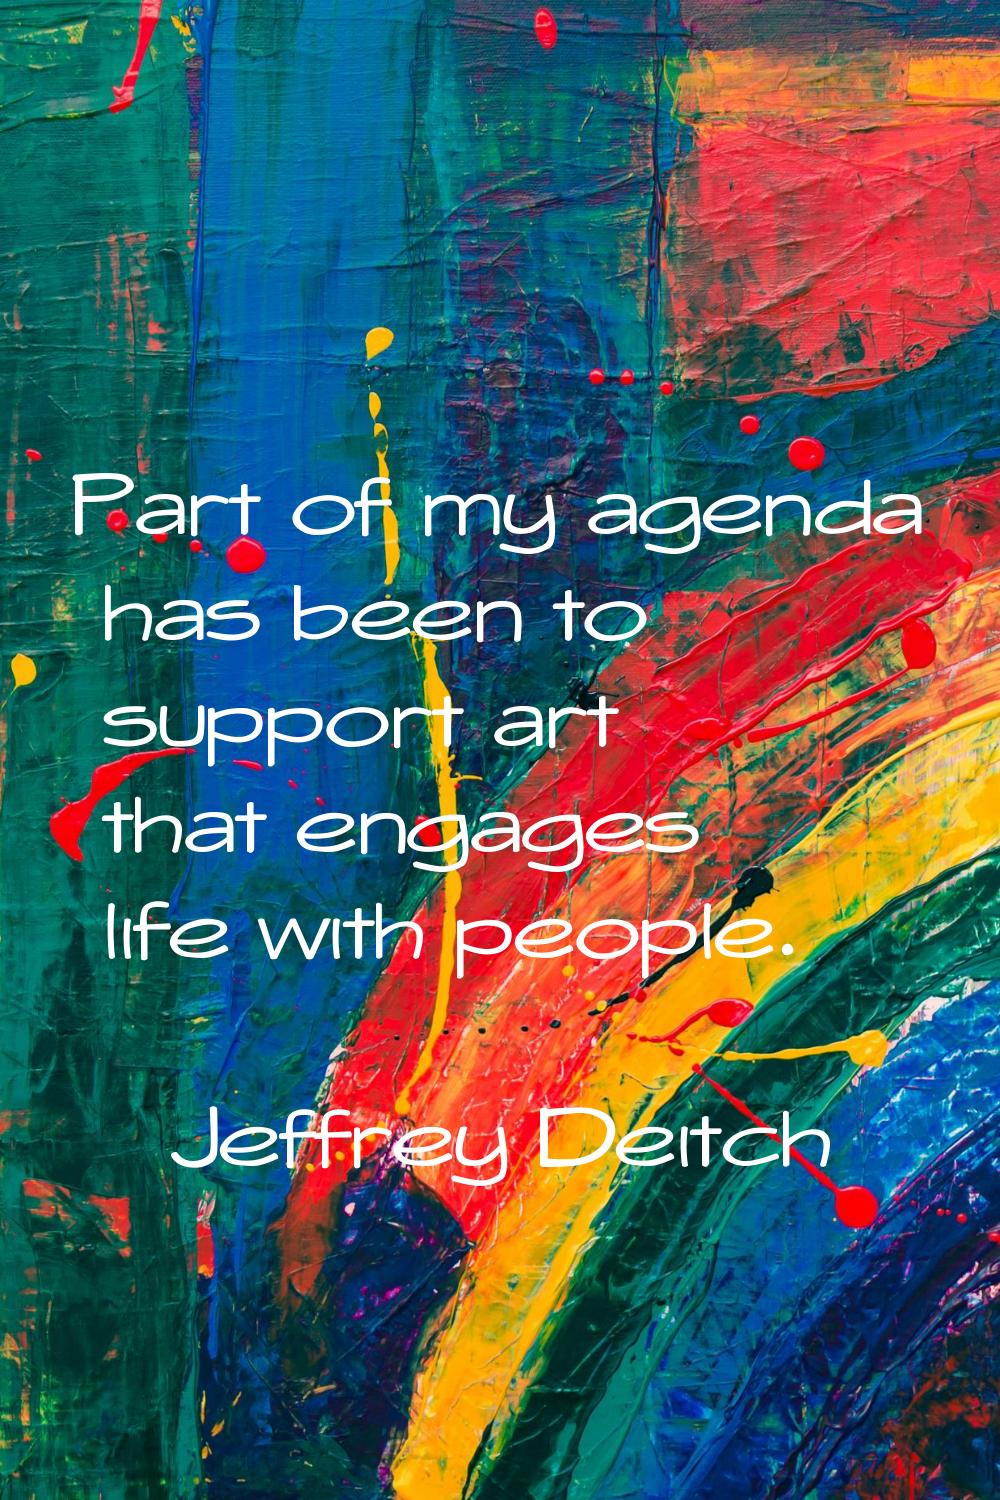 Part of my agenda has been to support art that engages life with people.